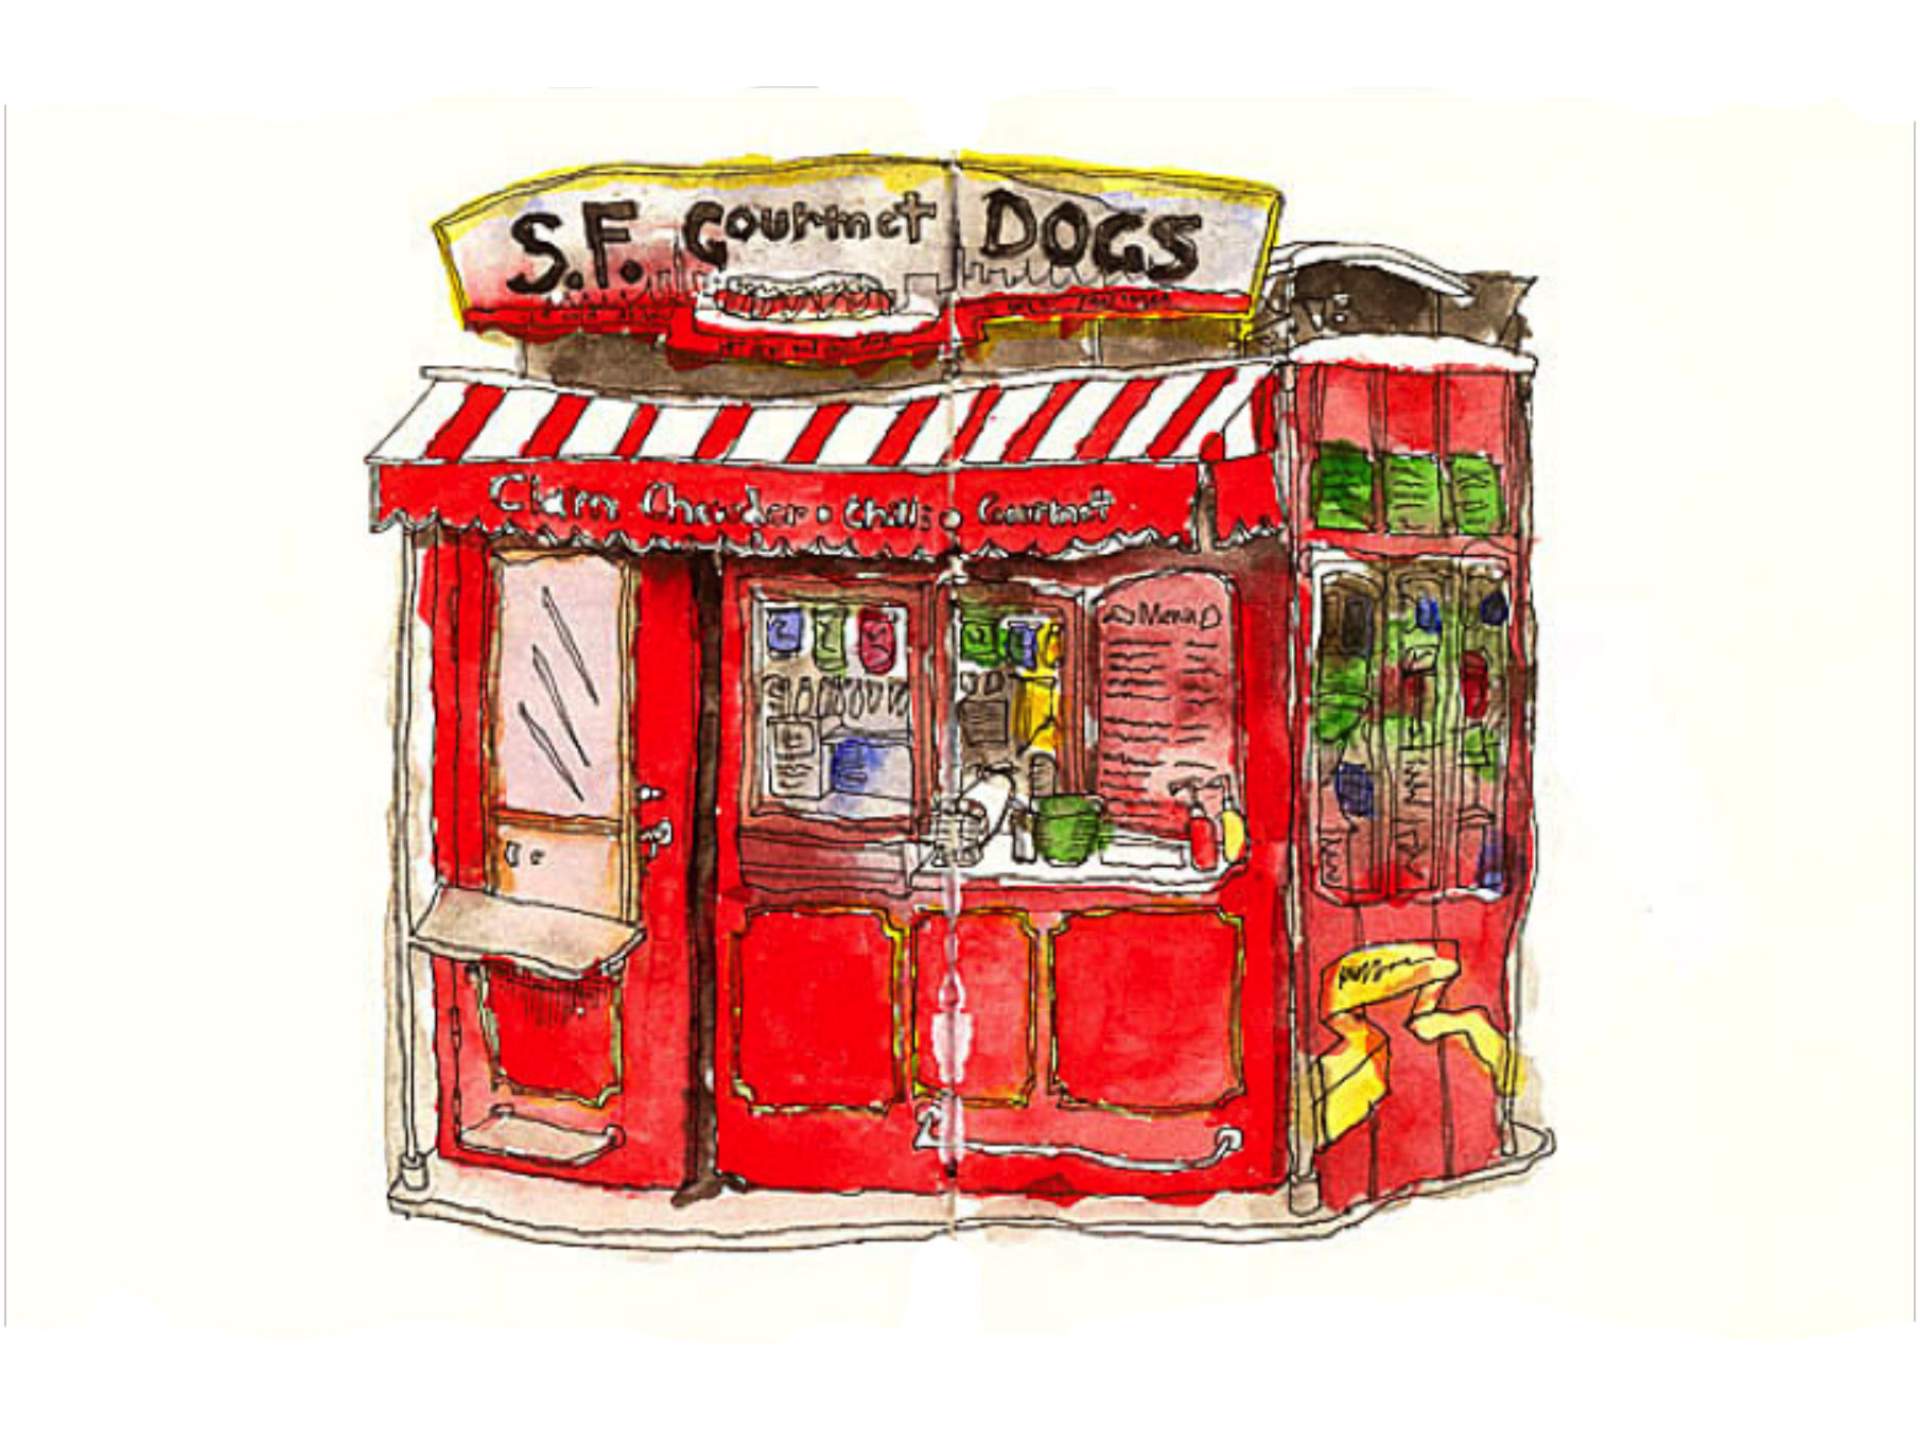 S.F. GOURMET DOGS, John Woolley, 2009, 10 years old